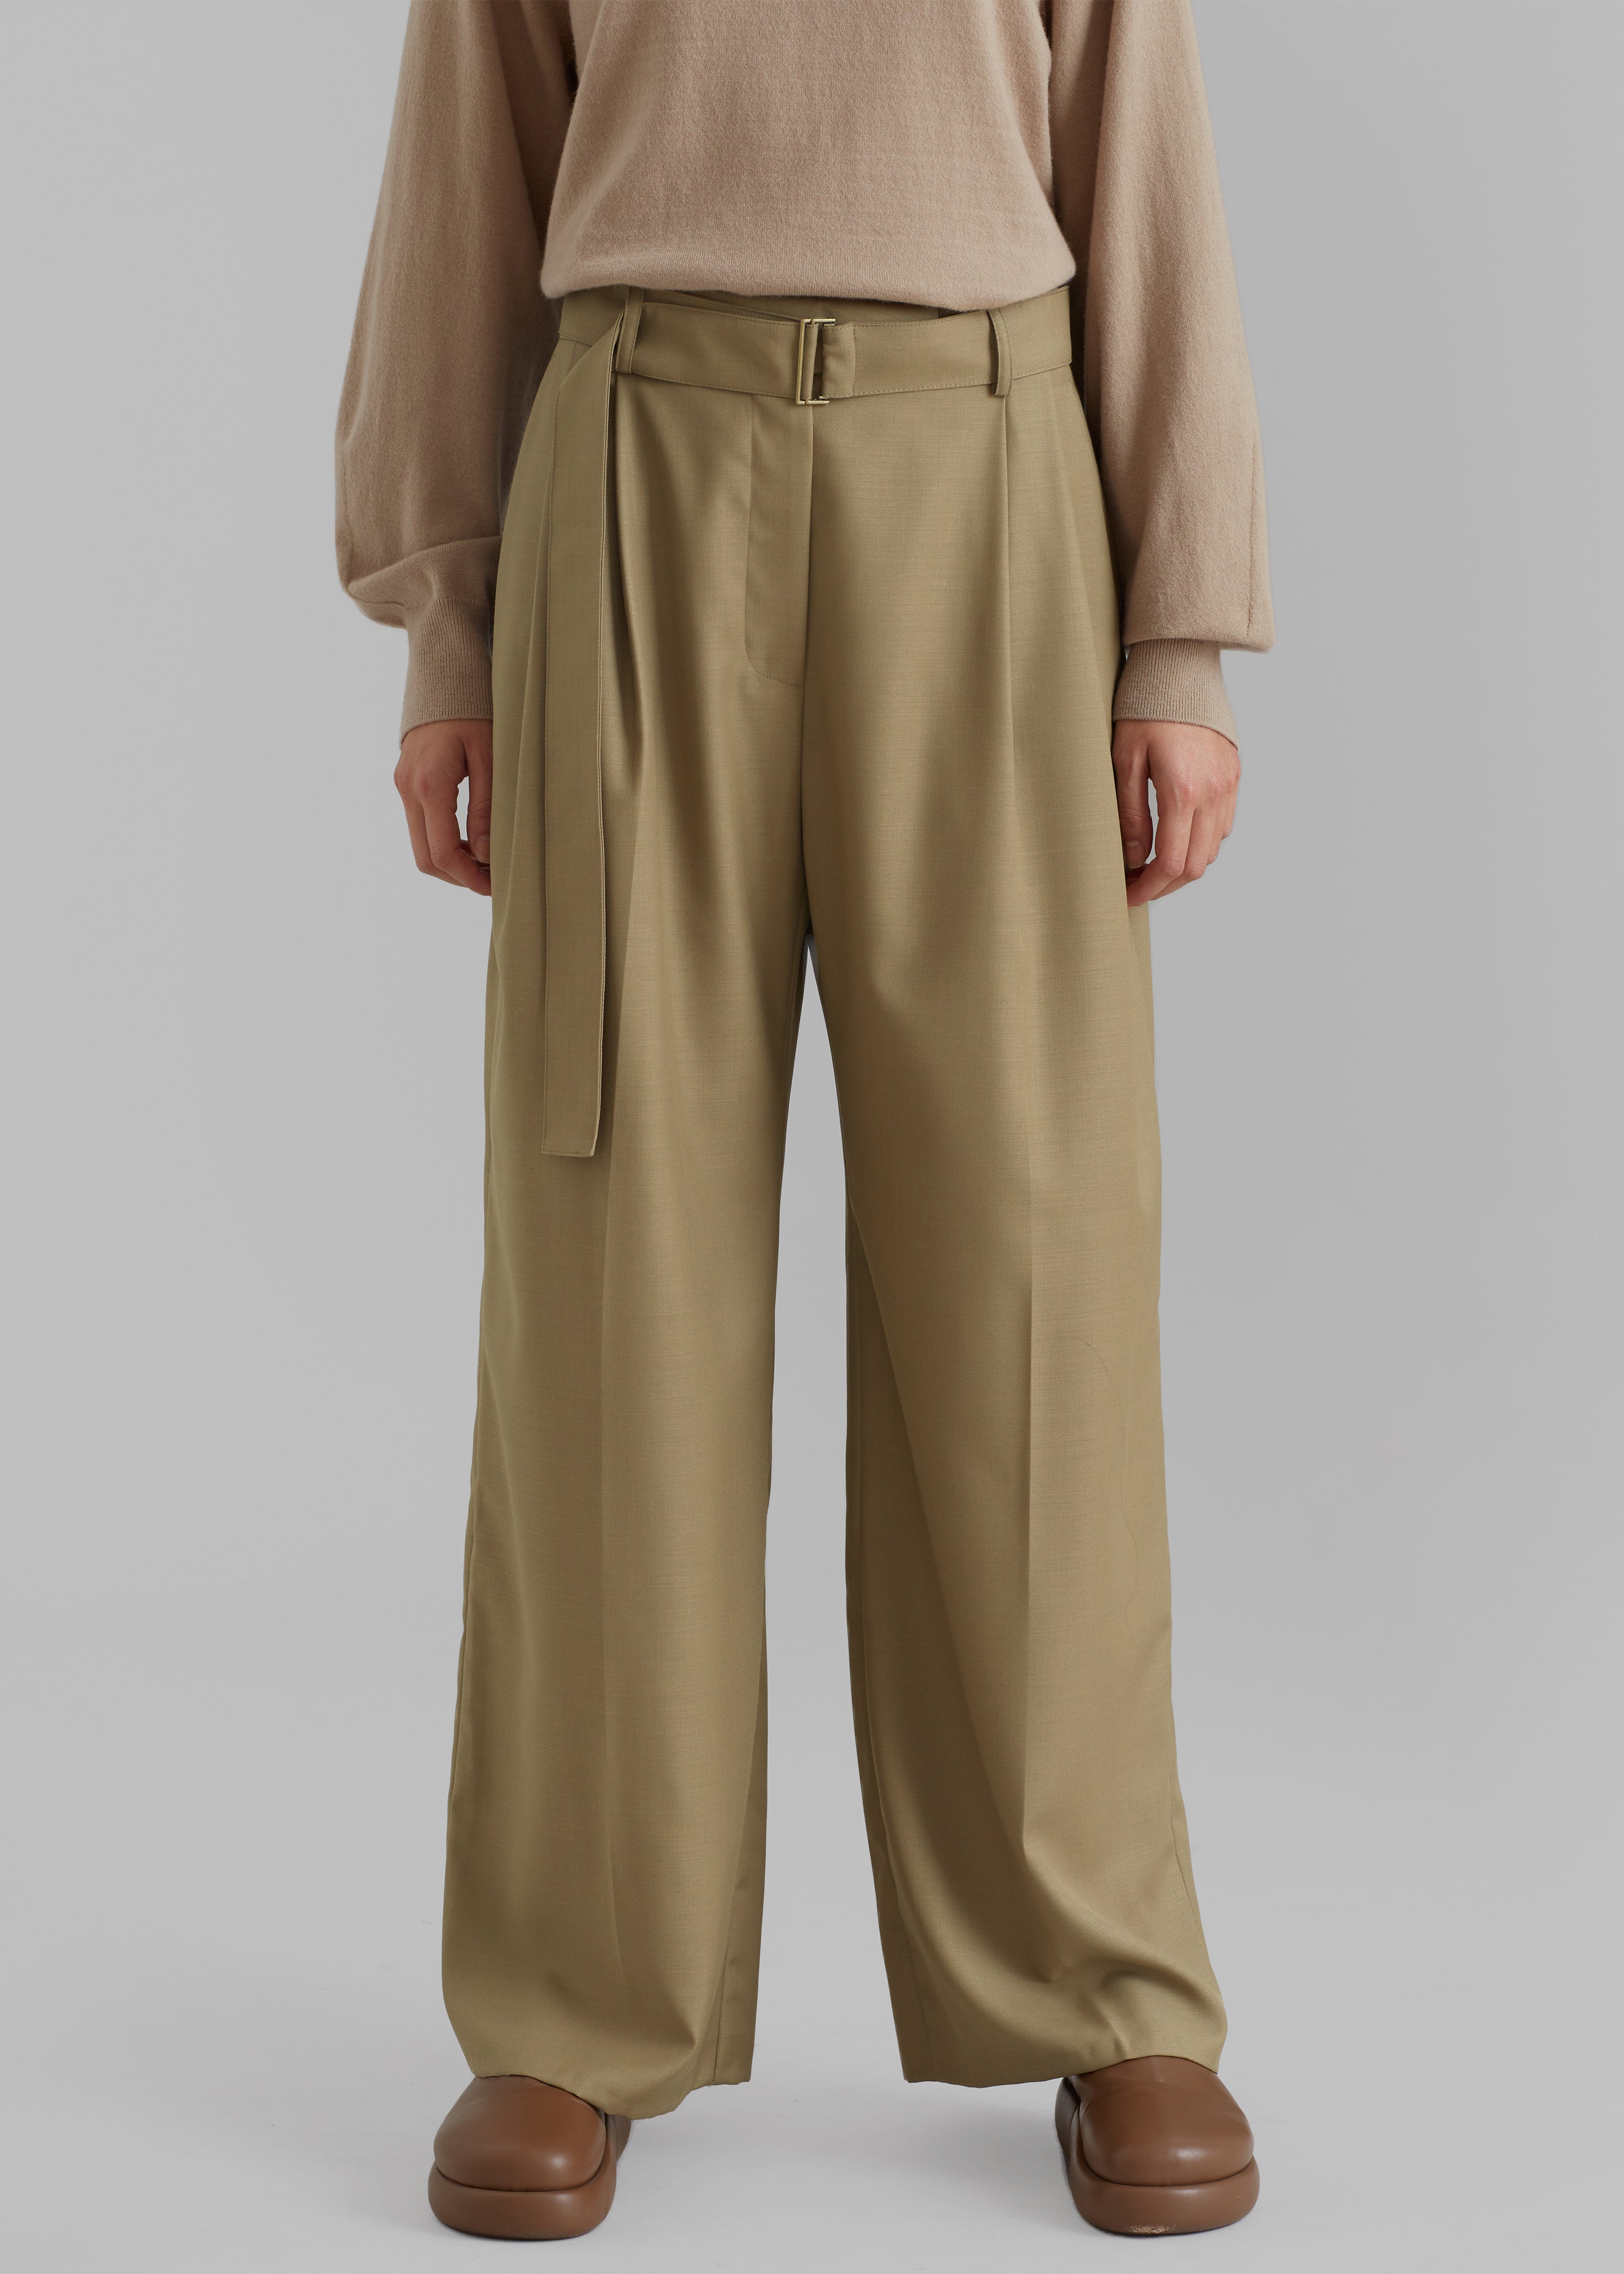 Lyxe Belted Pants - Taupe